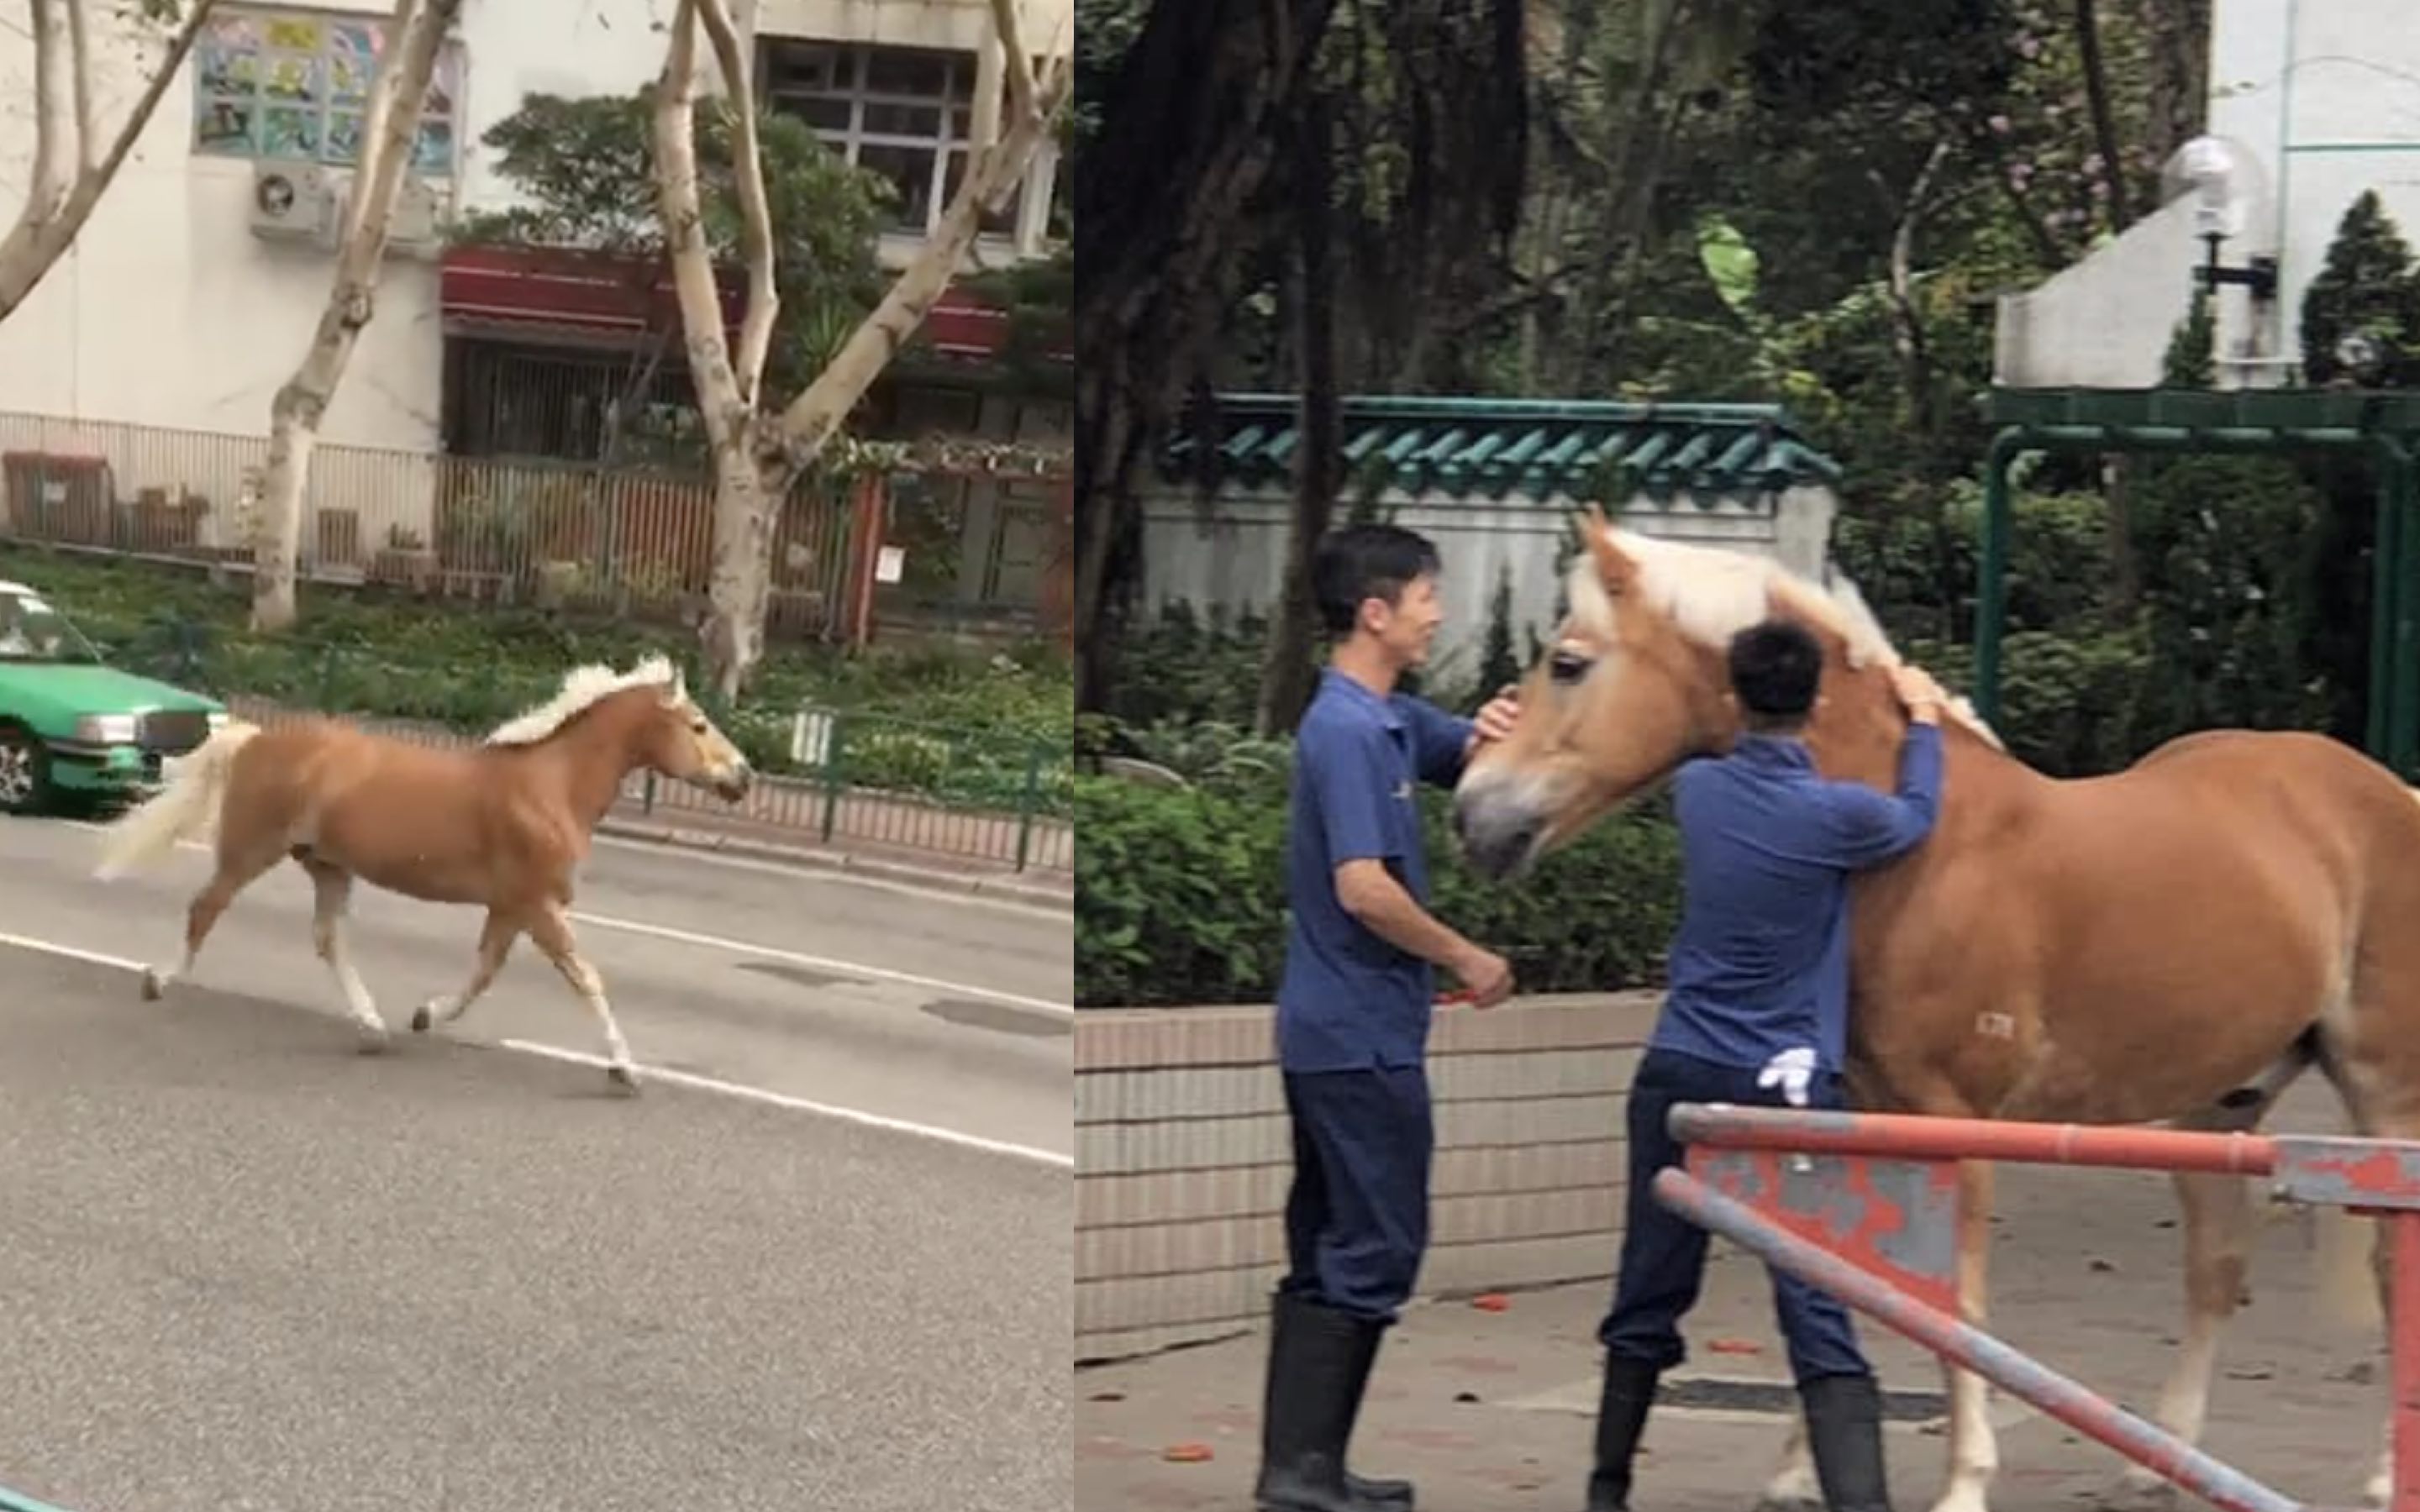 A horse escaped from Tuen Mun Public Riding School this morning and was later found at a housing estate in the area. Photos and screengrabs via Facebook/100 Most/Di Di Au.